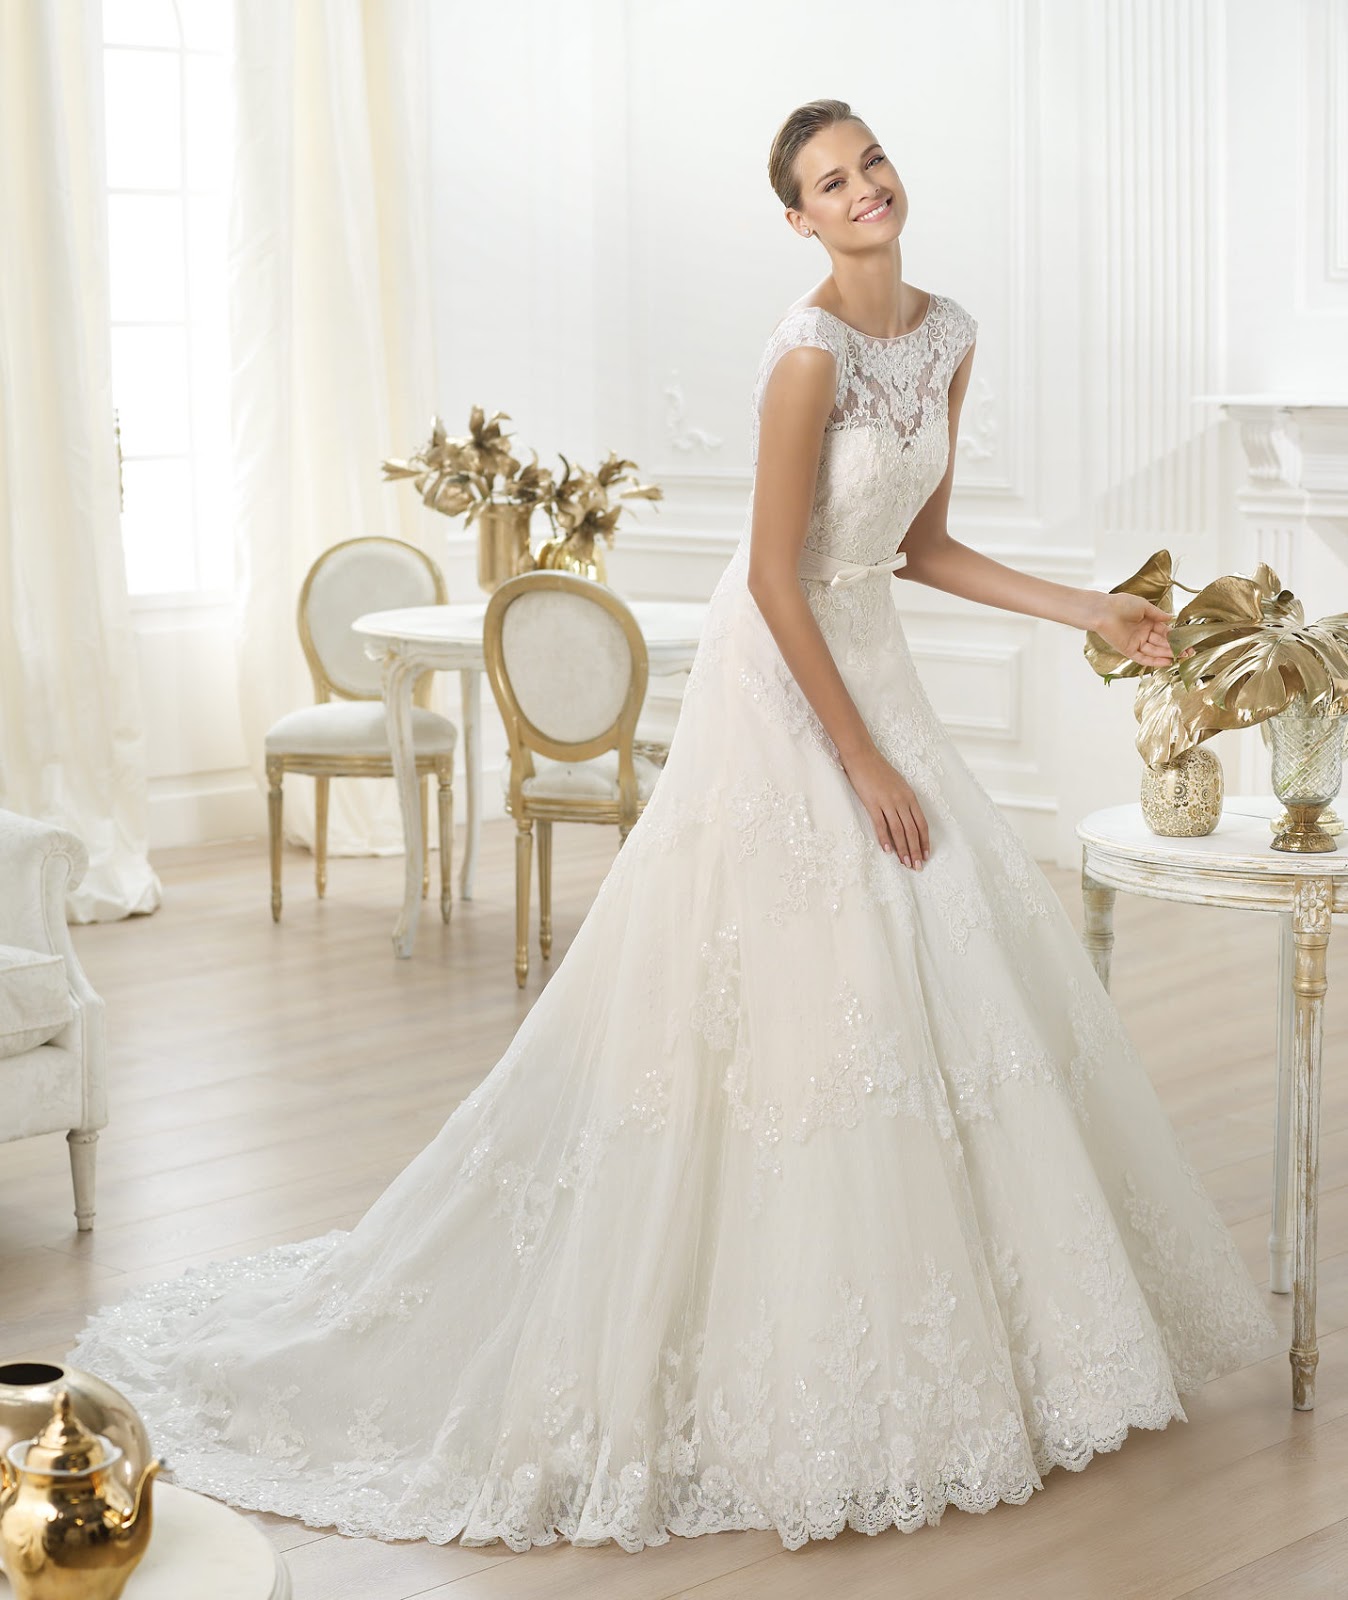 Top Chic Lace Wedding Dresses of all time The ultimate guide 